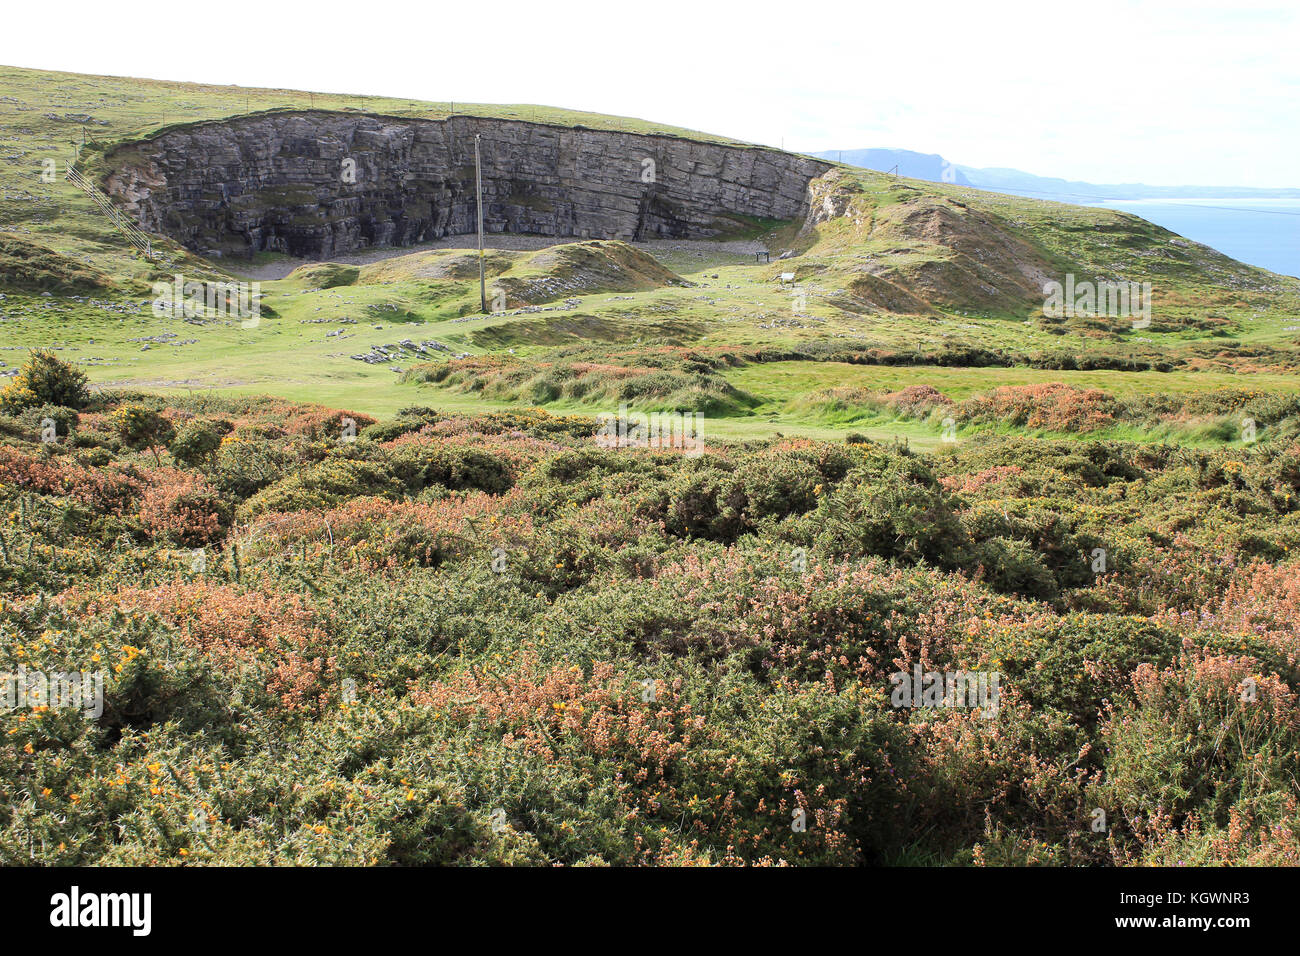 Bishops Quarry on the Great Orme Headland, Wales Stock Photo